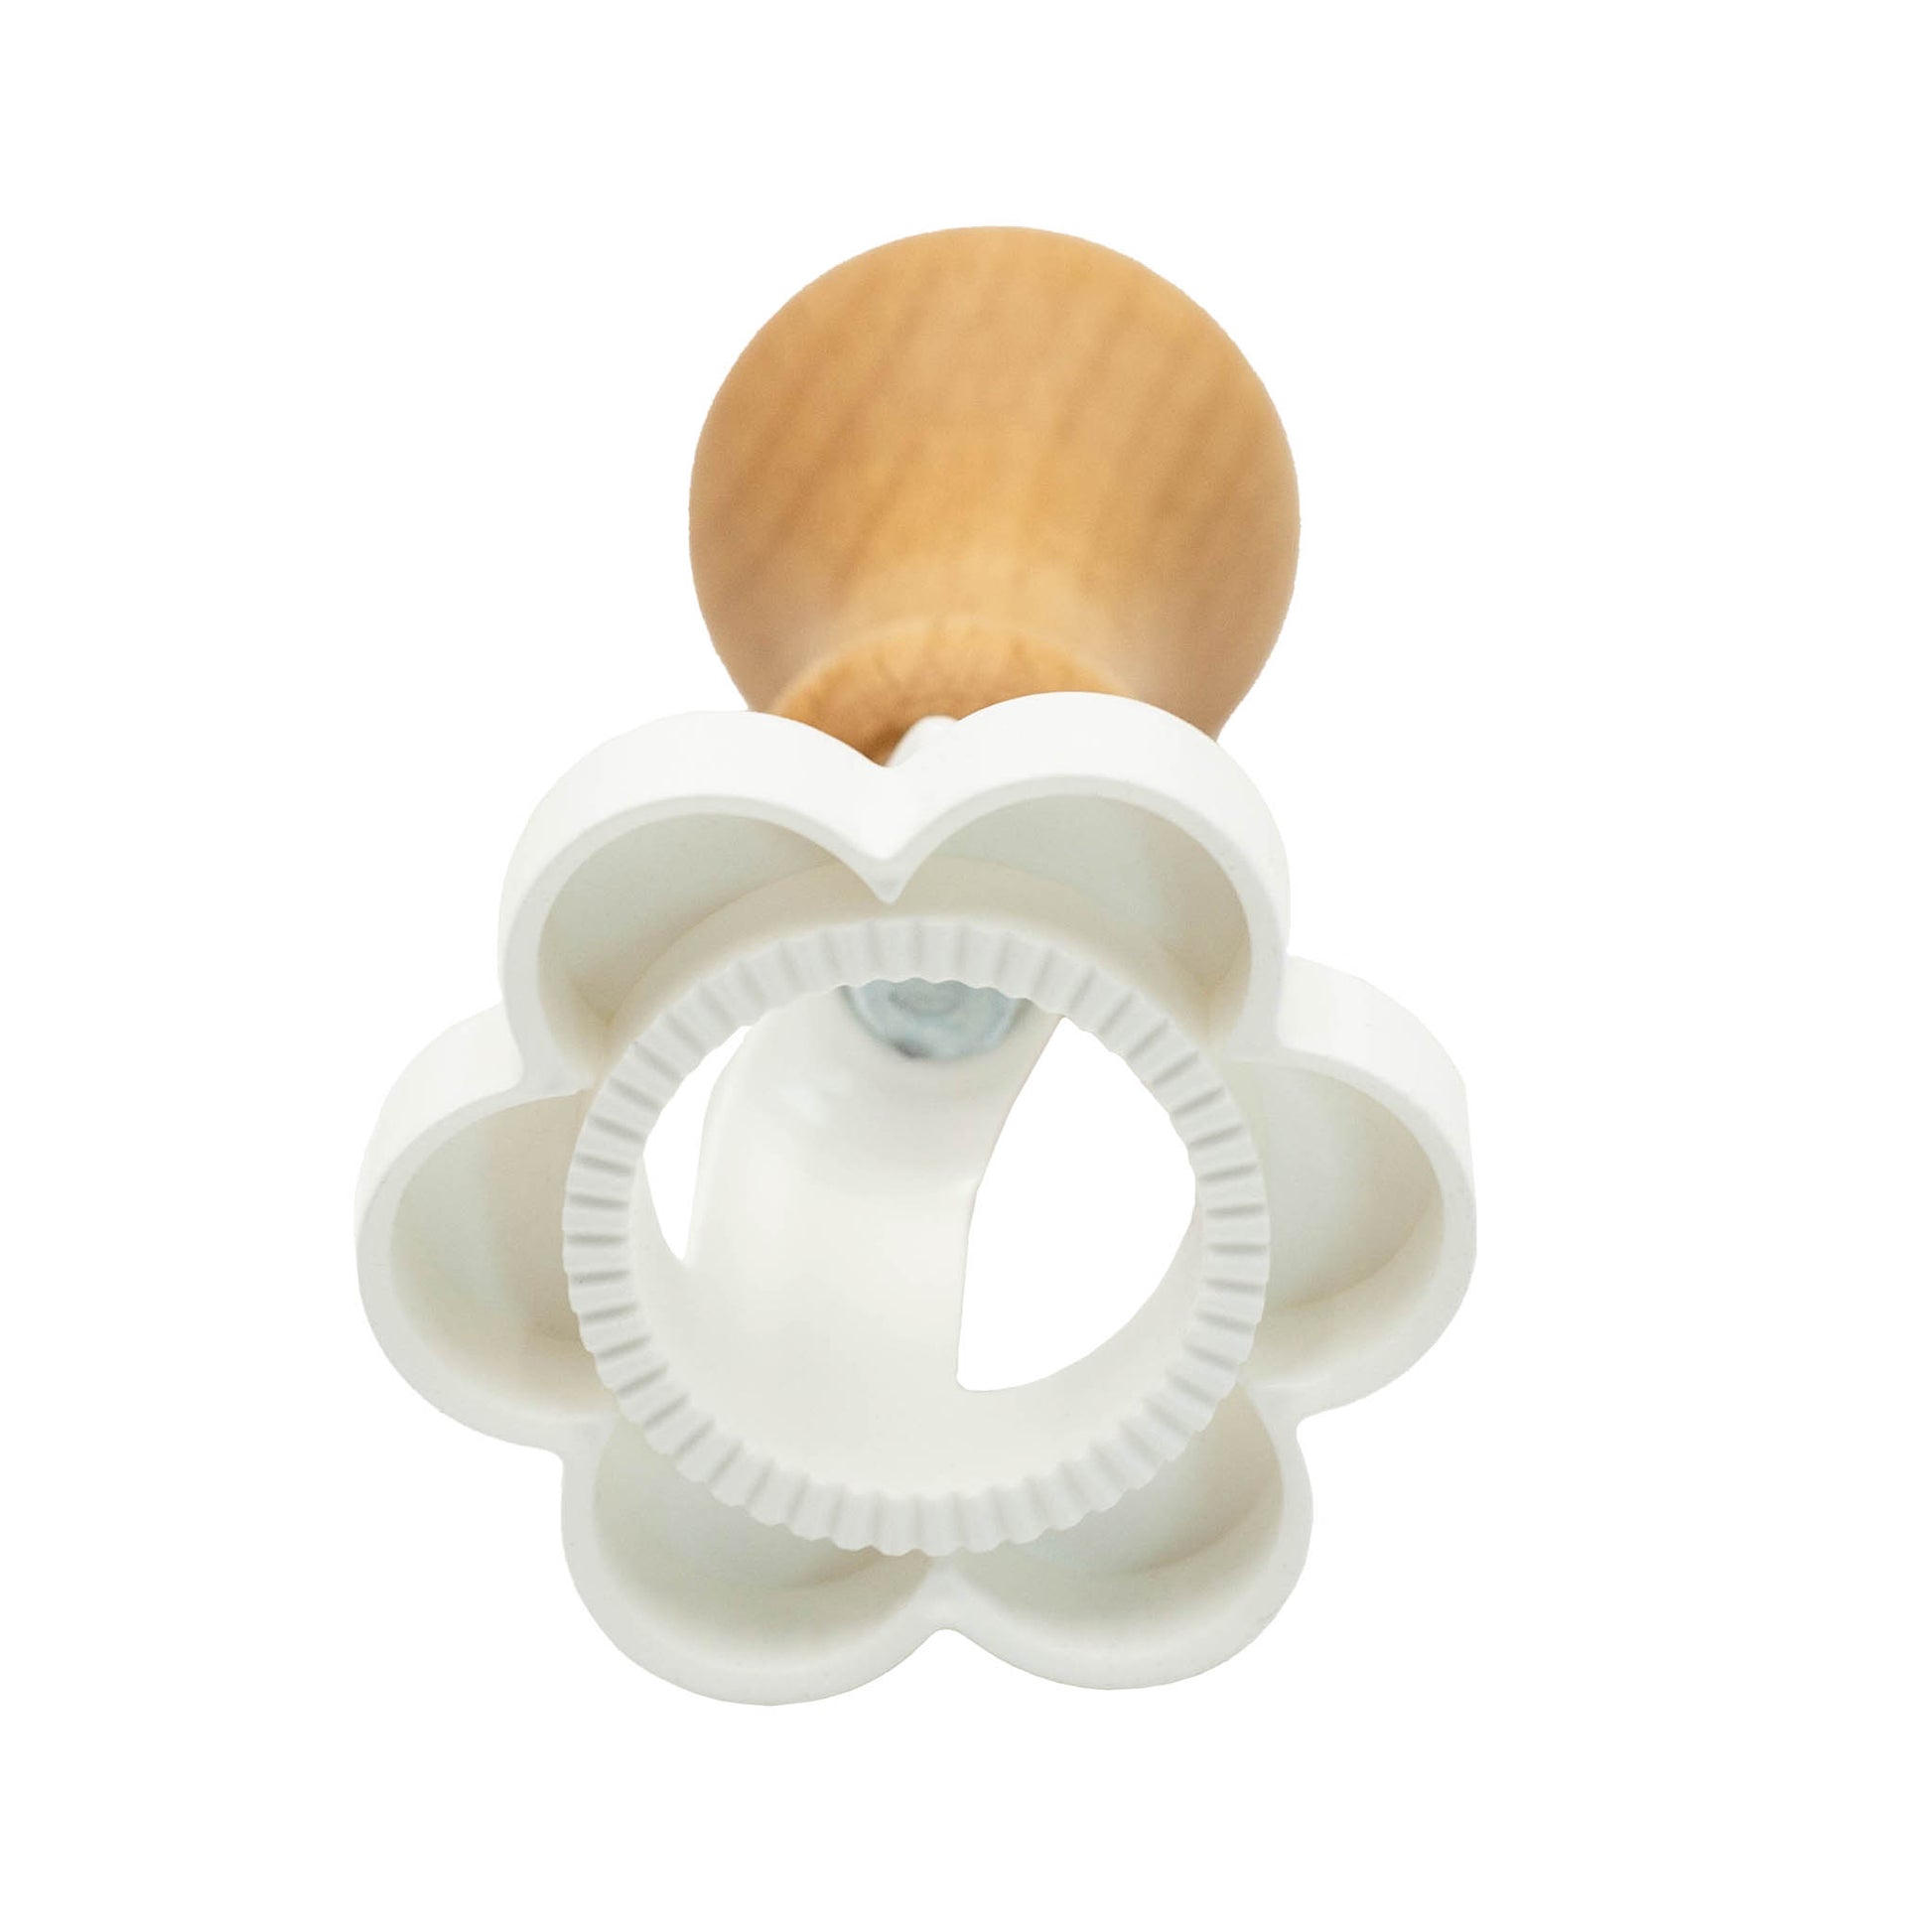 Italian made white plastic flower shape biscuit and pastry cutter with wooden handle.